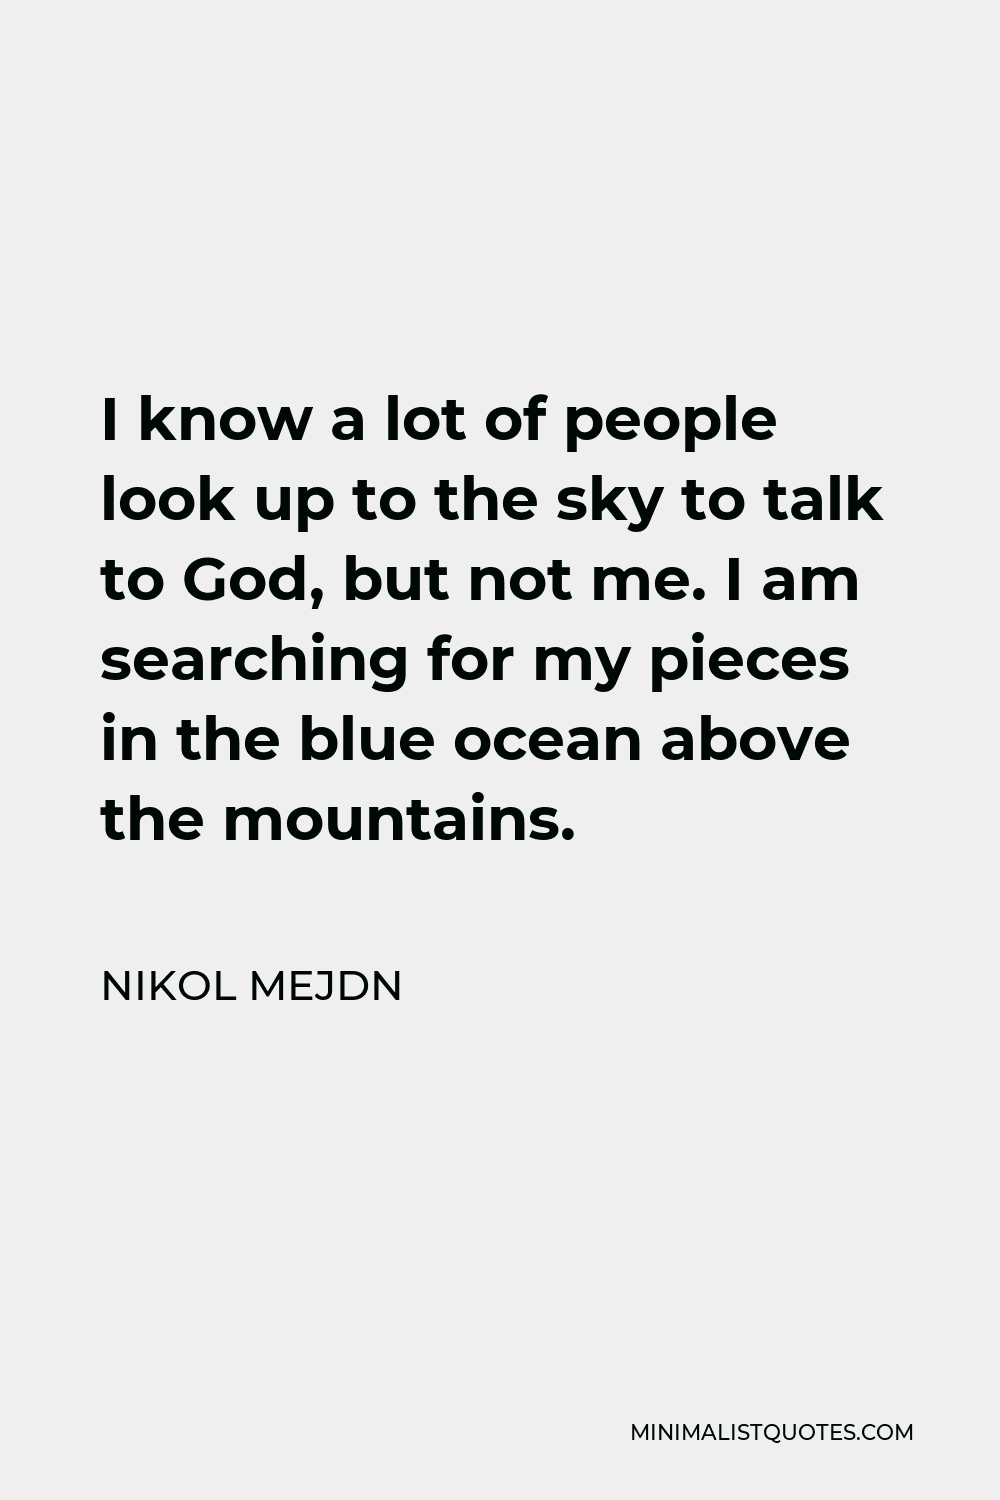 Nikol Mejdn Quote - I know a lot of people look up to the sky to talk to God, but not me. I am searching for my pieces in the blue ocean above the mountains.